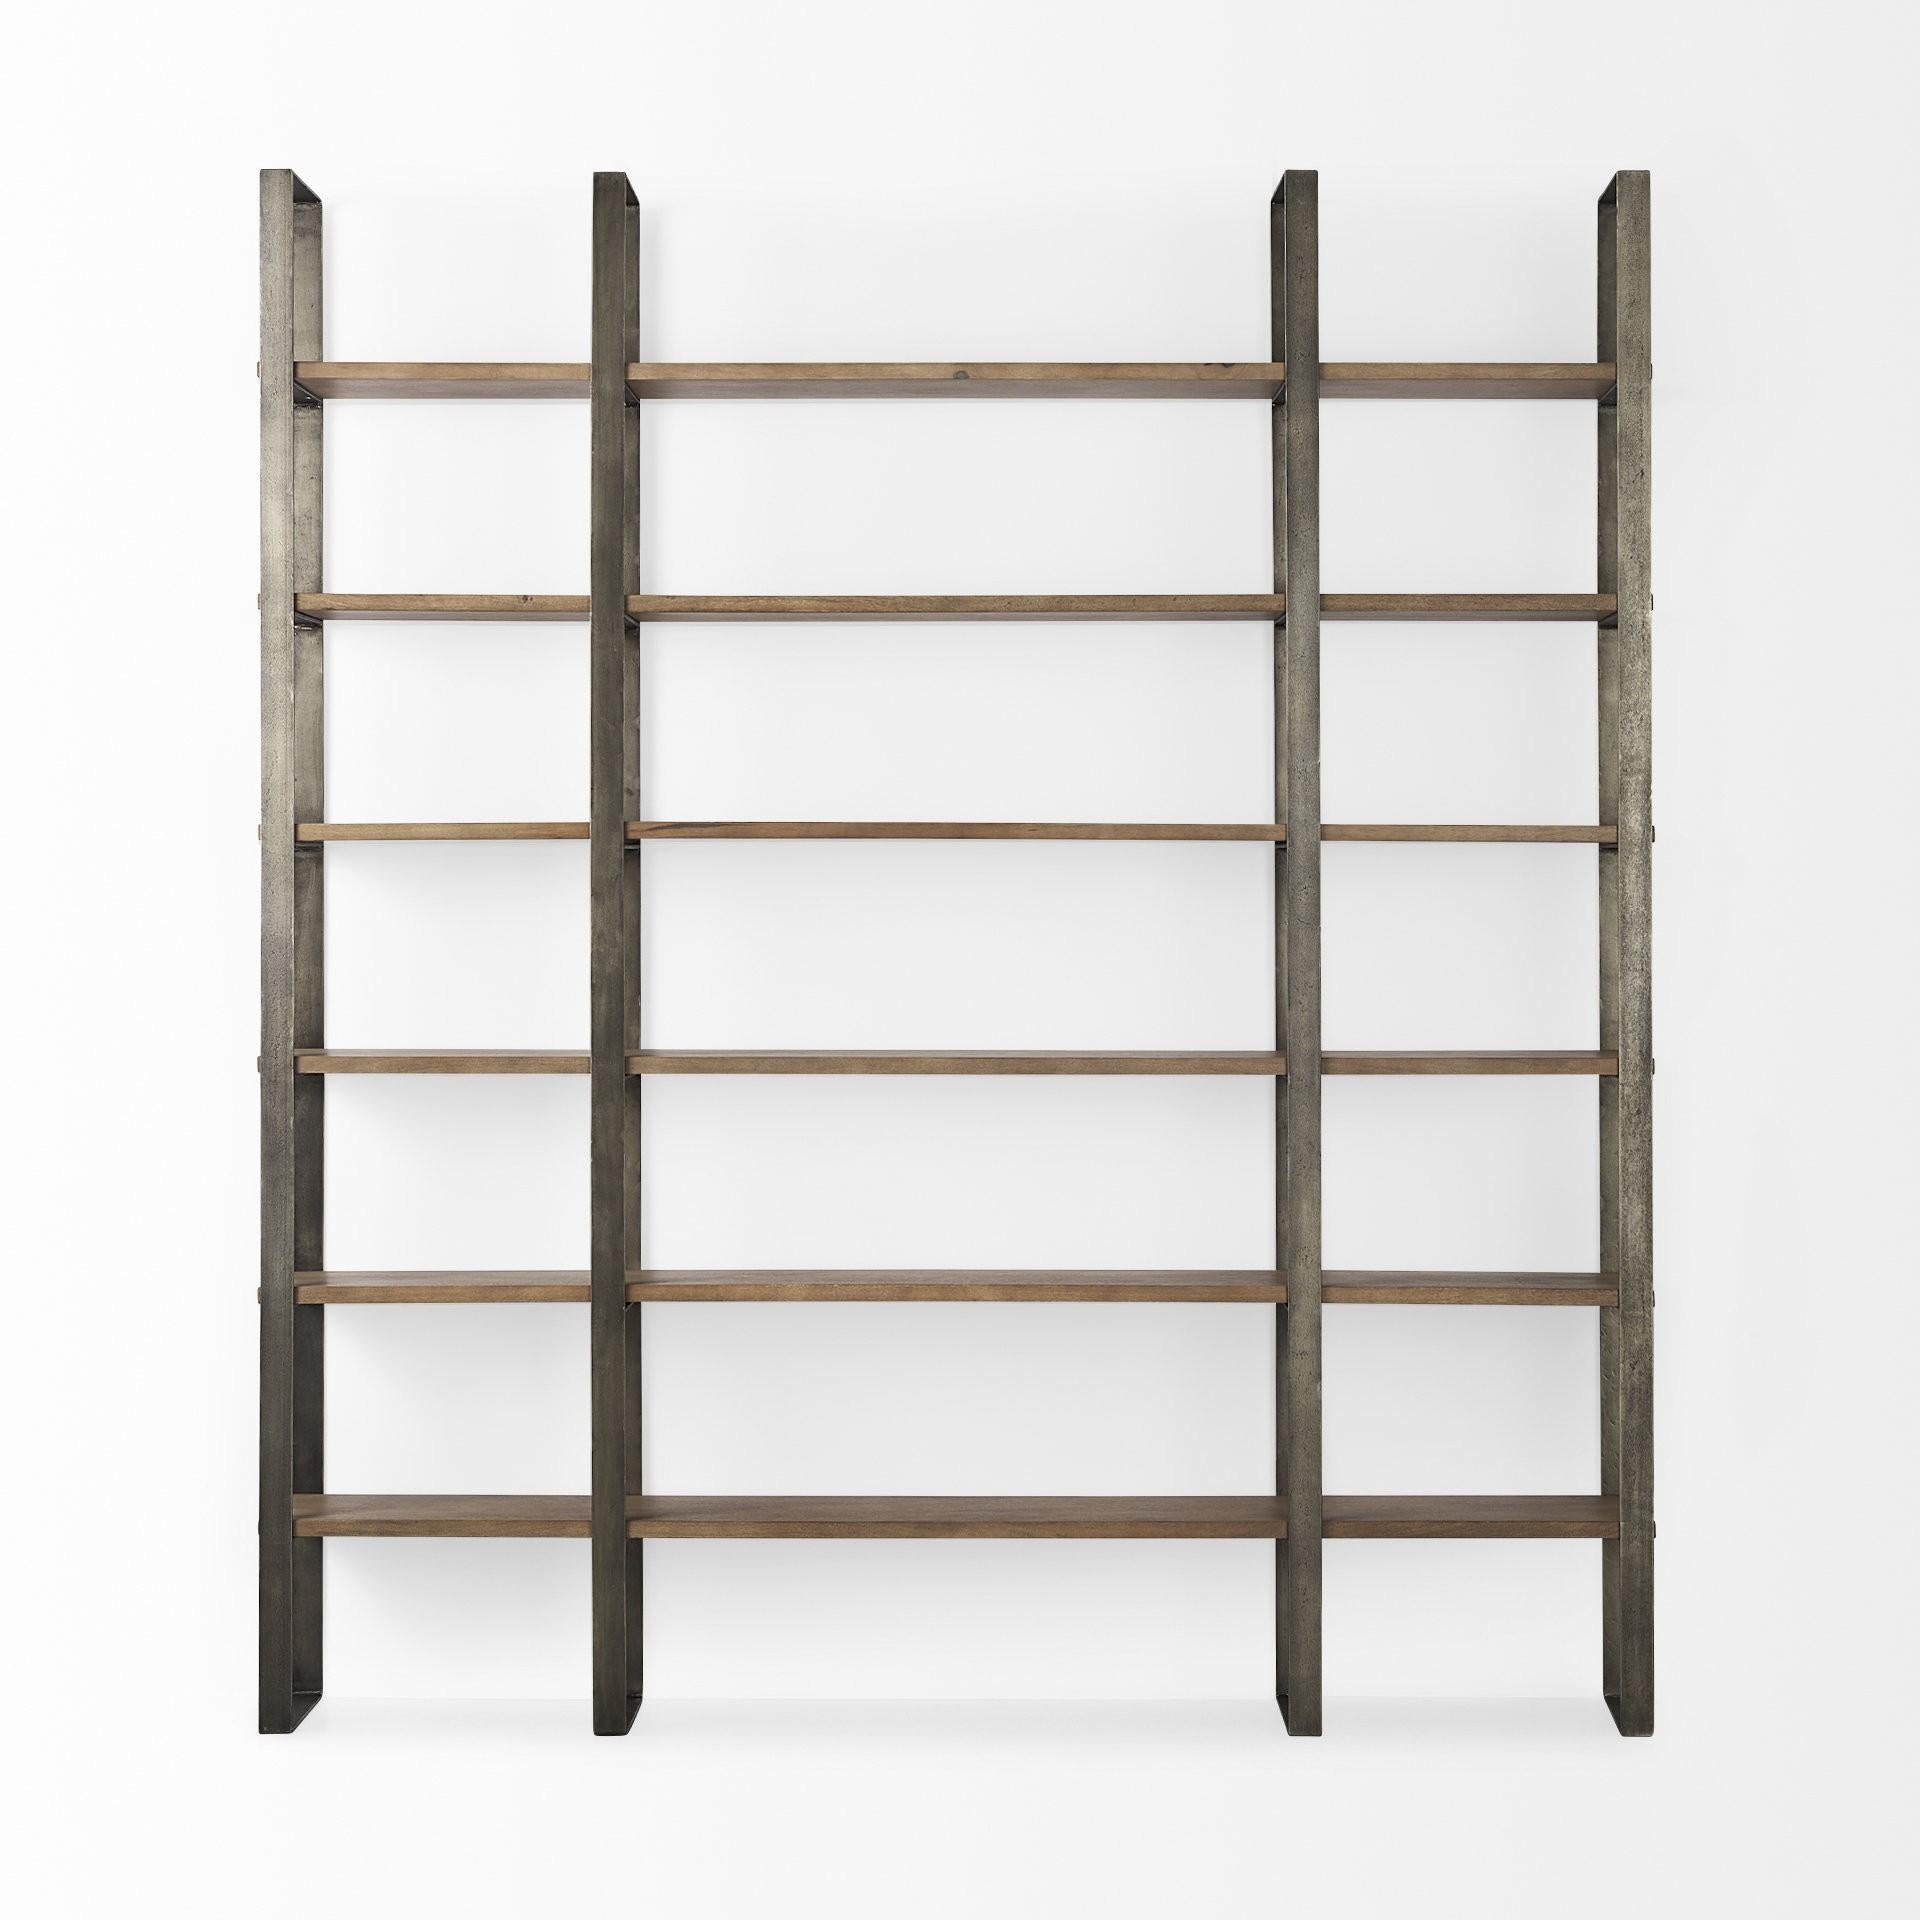 Silver Iron Framed Wooden Shelving Unit